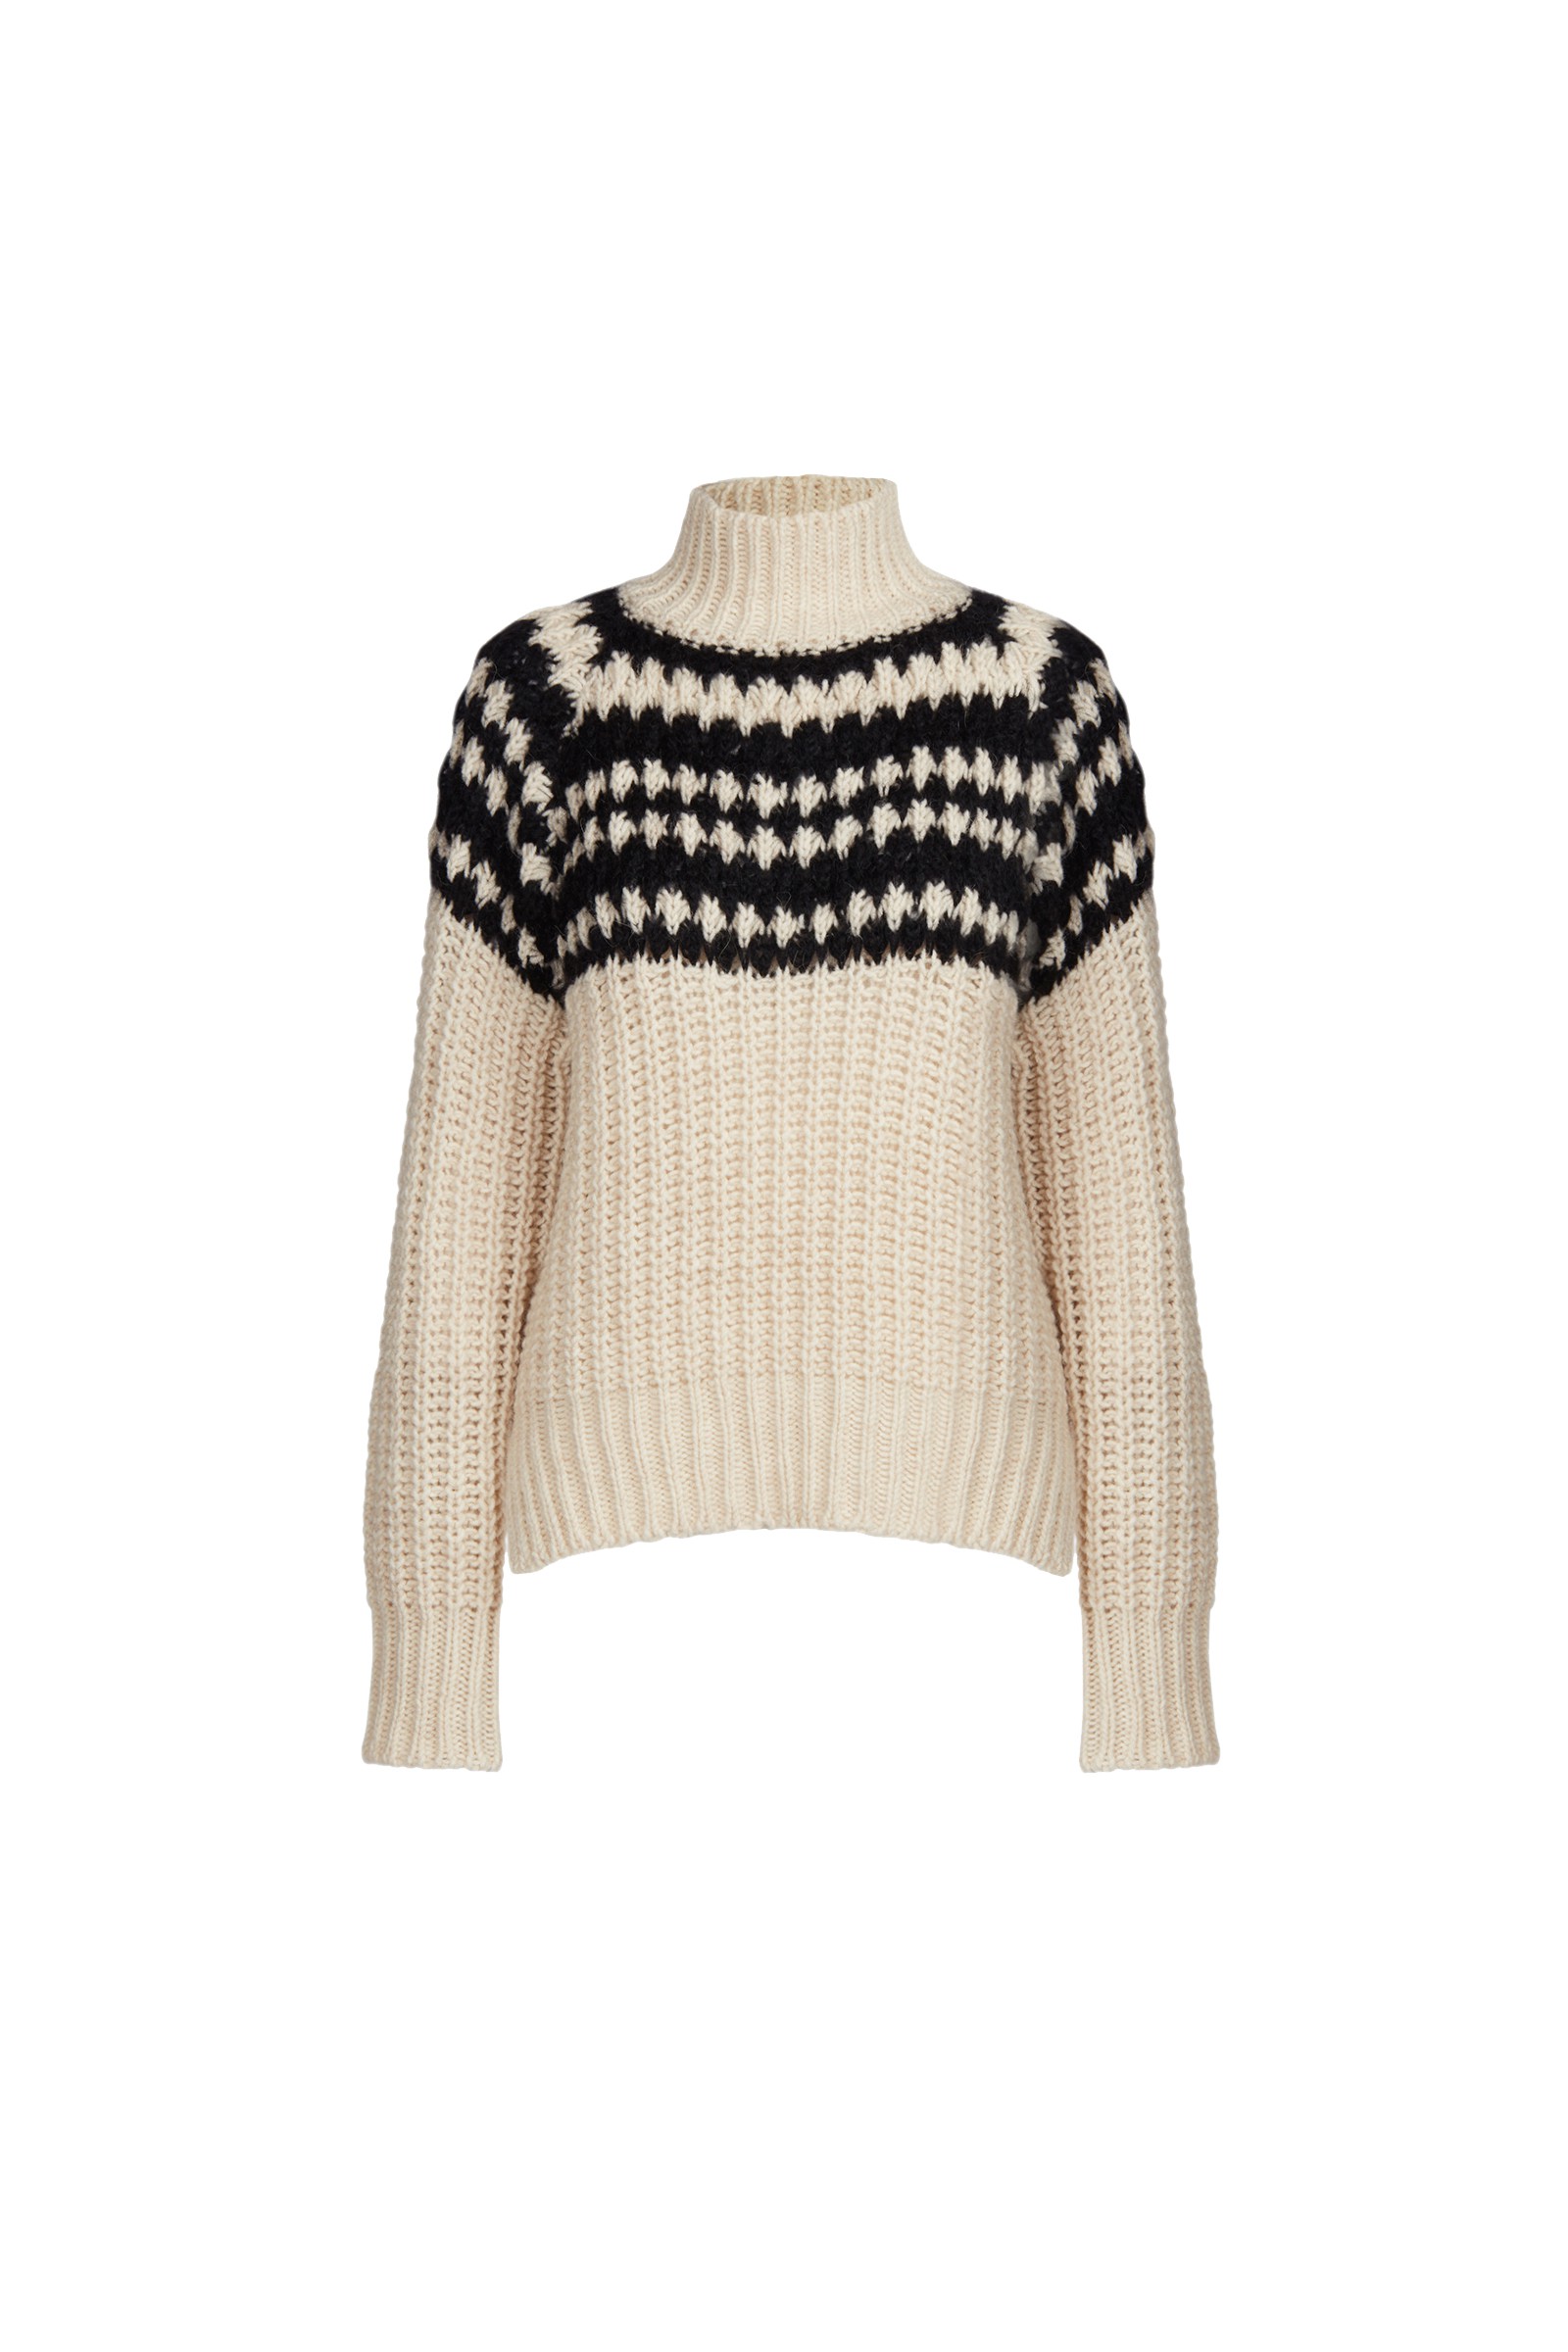 Norwegian knit jumper with high neck